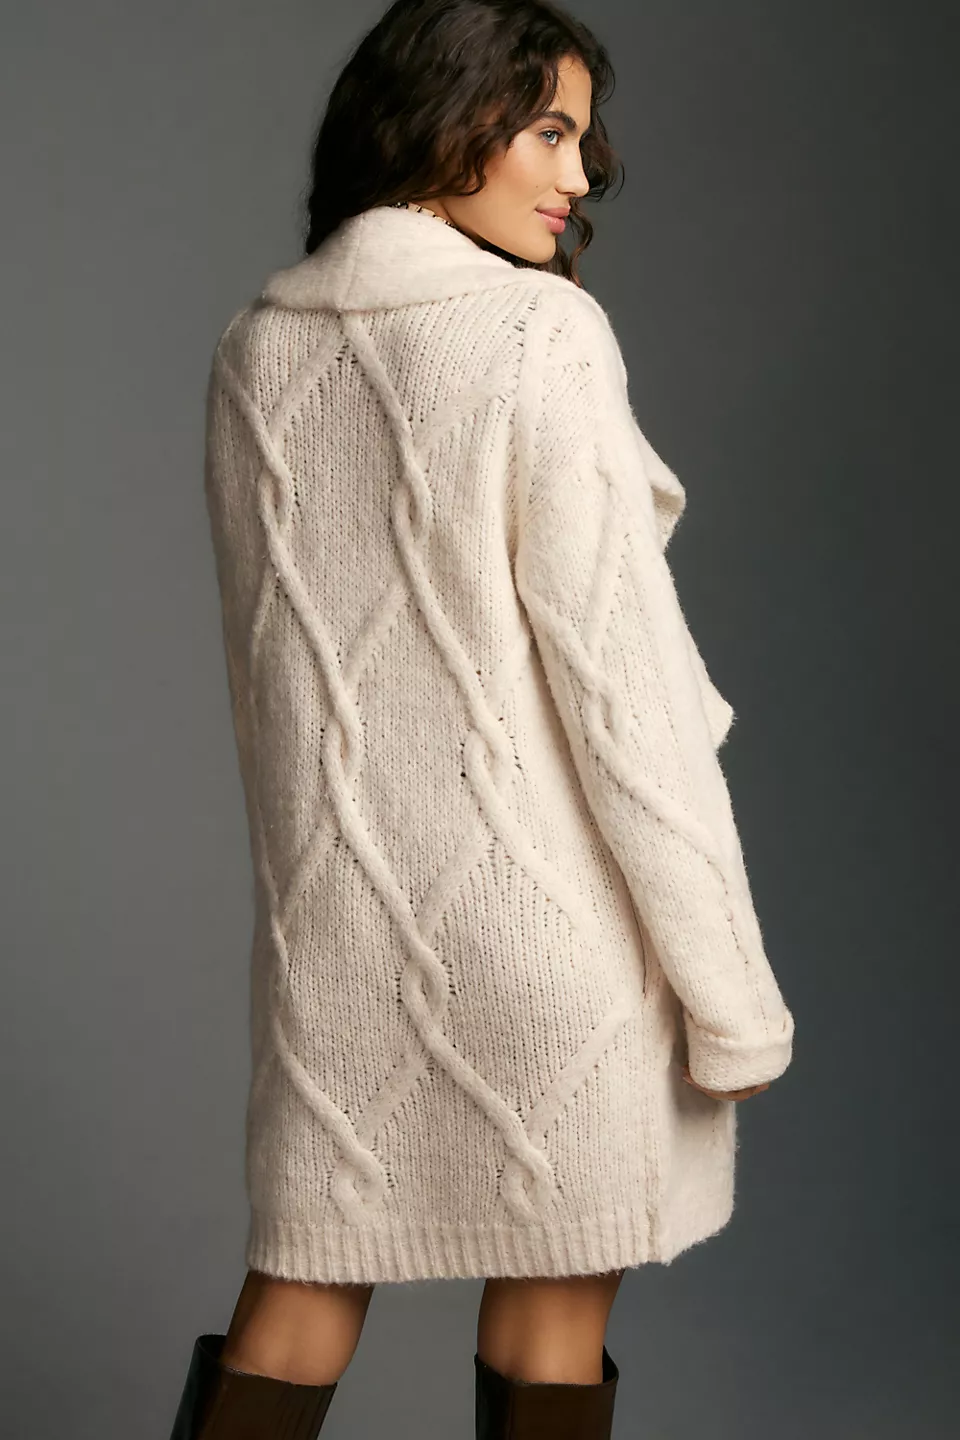 Hooded Cardigan Sweater in ivory, Anthropologie. #cardigansweaters #winterwhites 